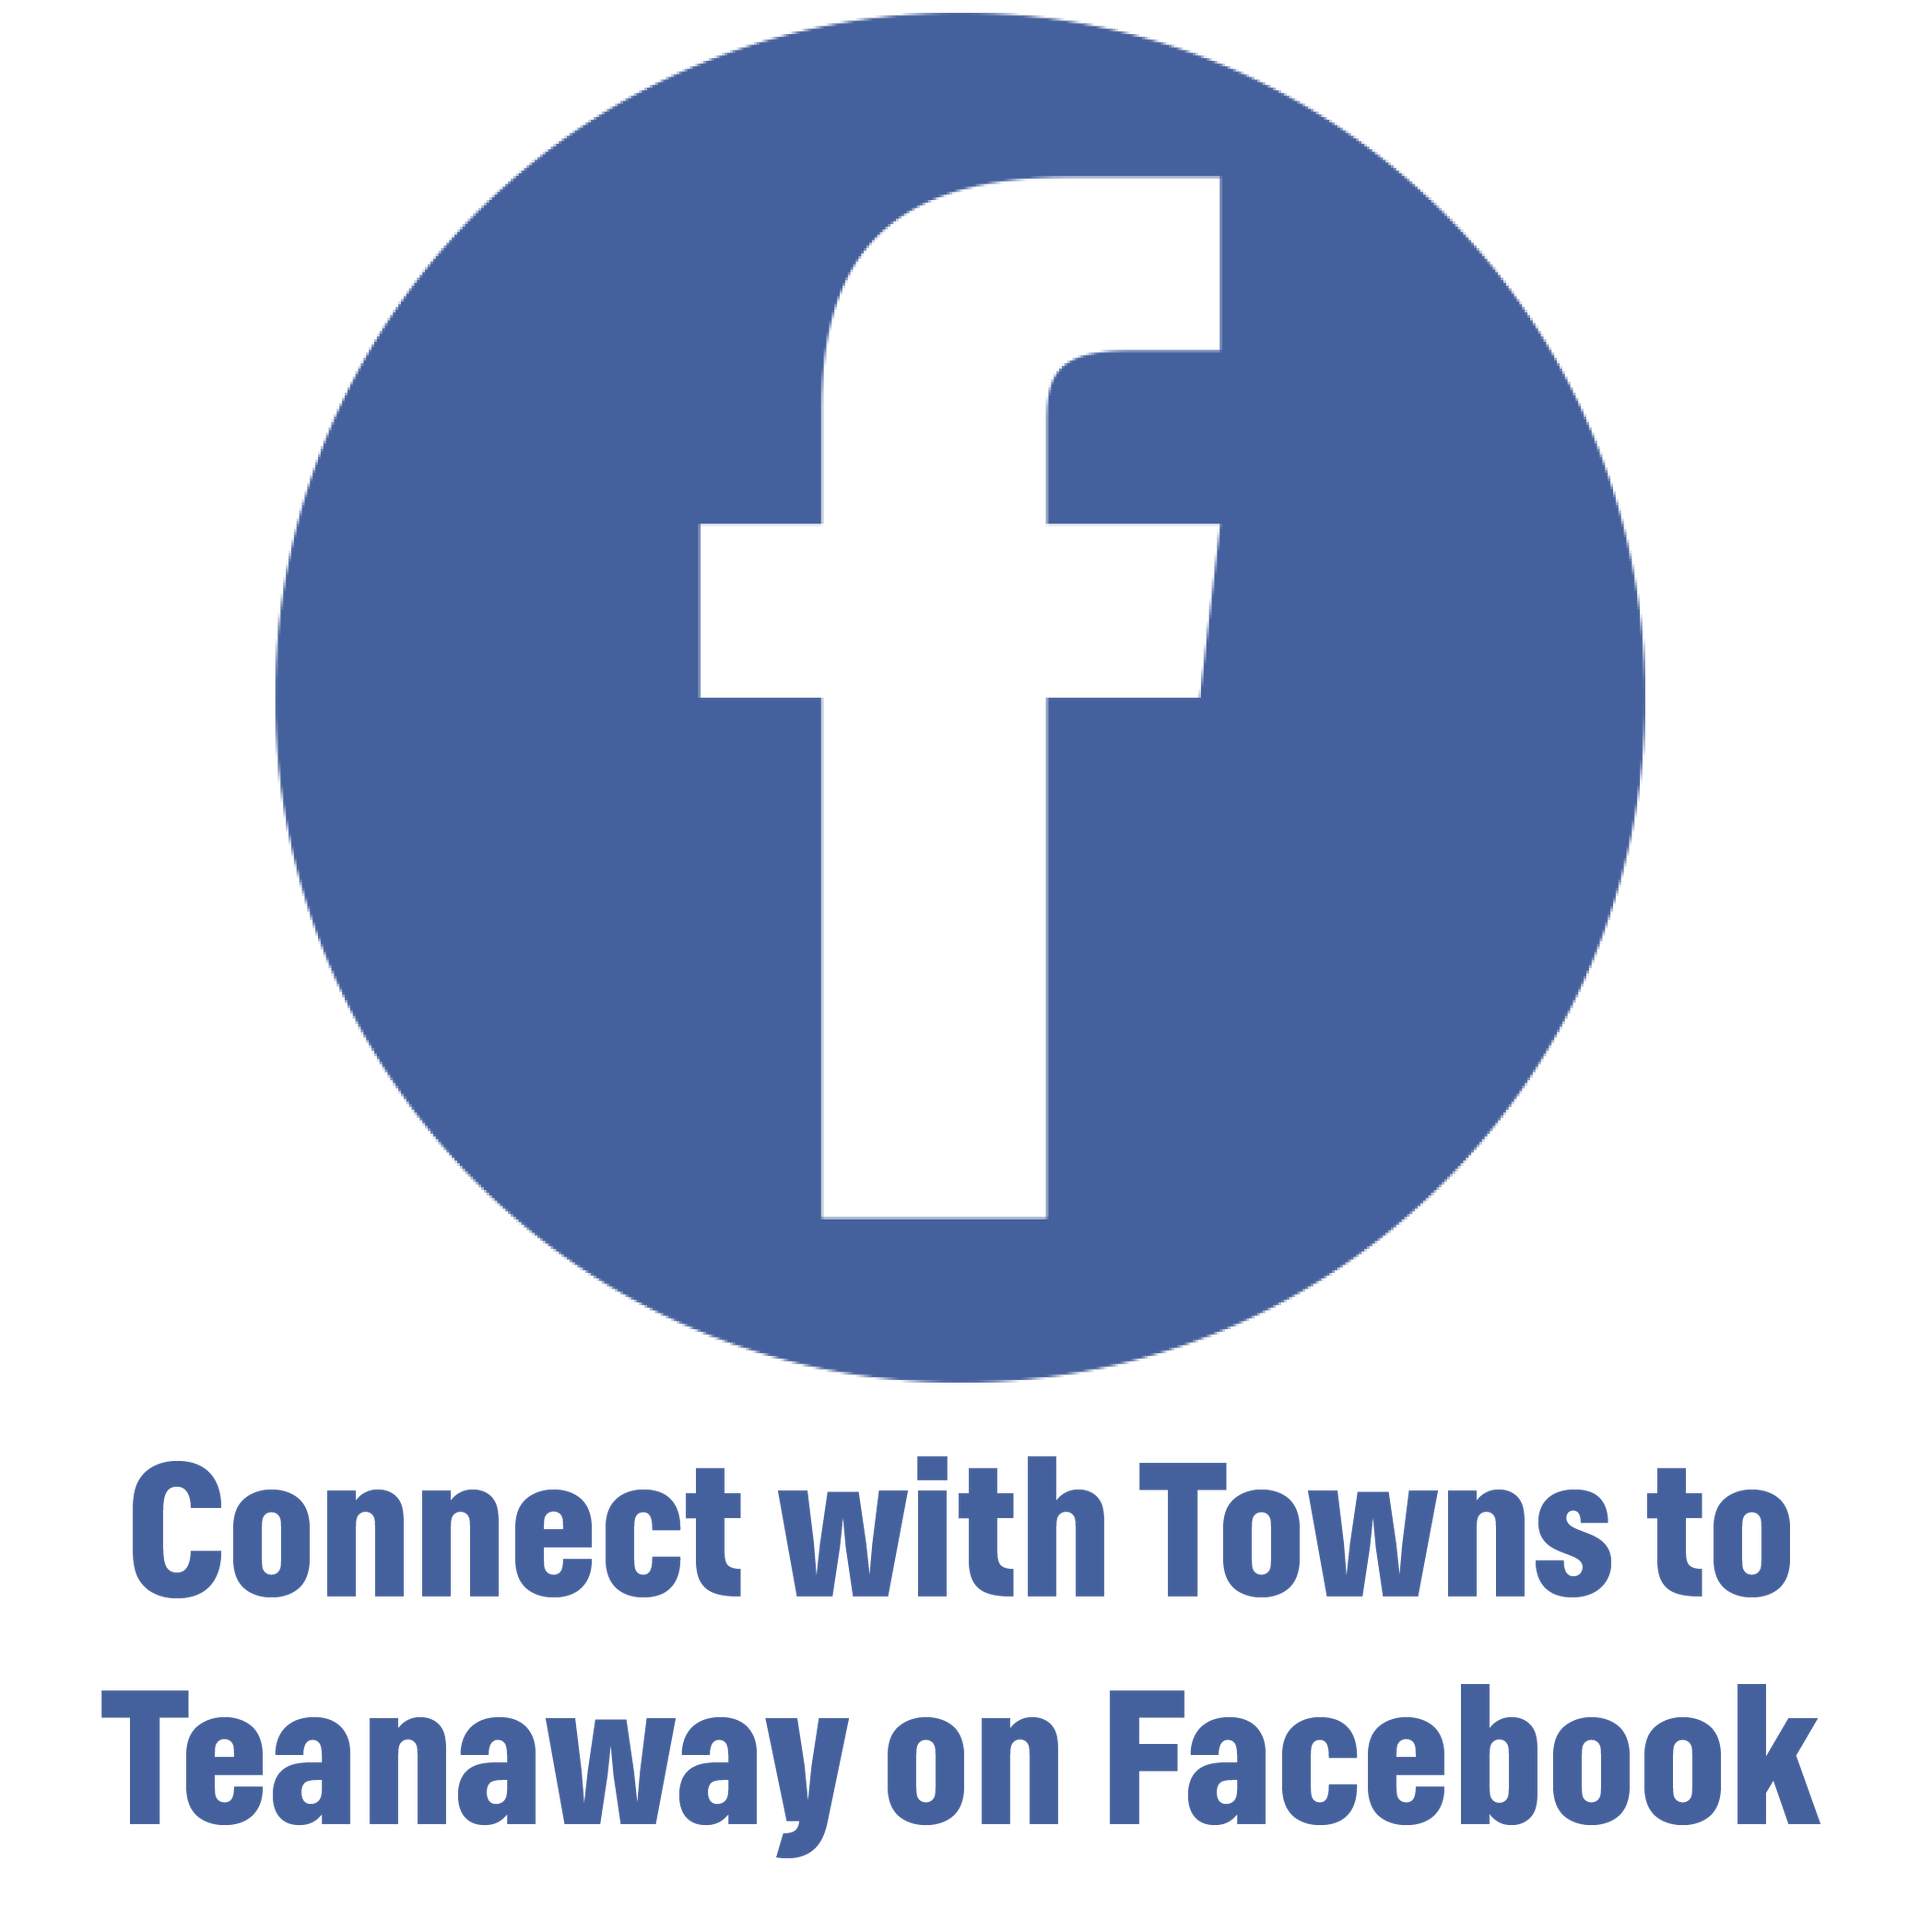 Connect with Towns to Teanaway on Facebook